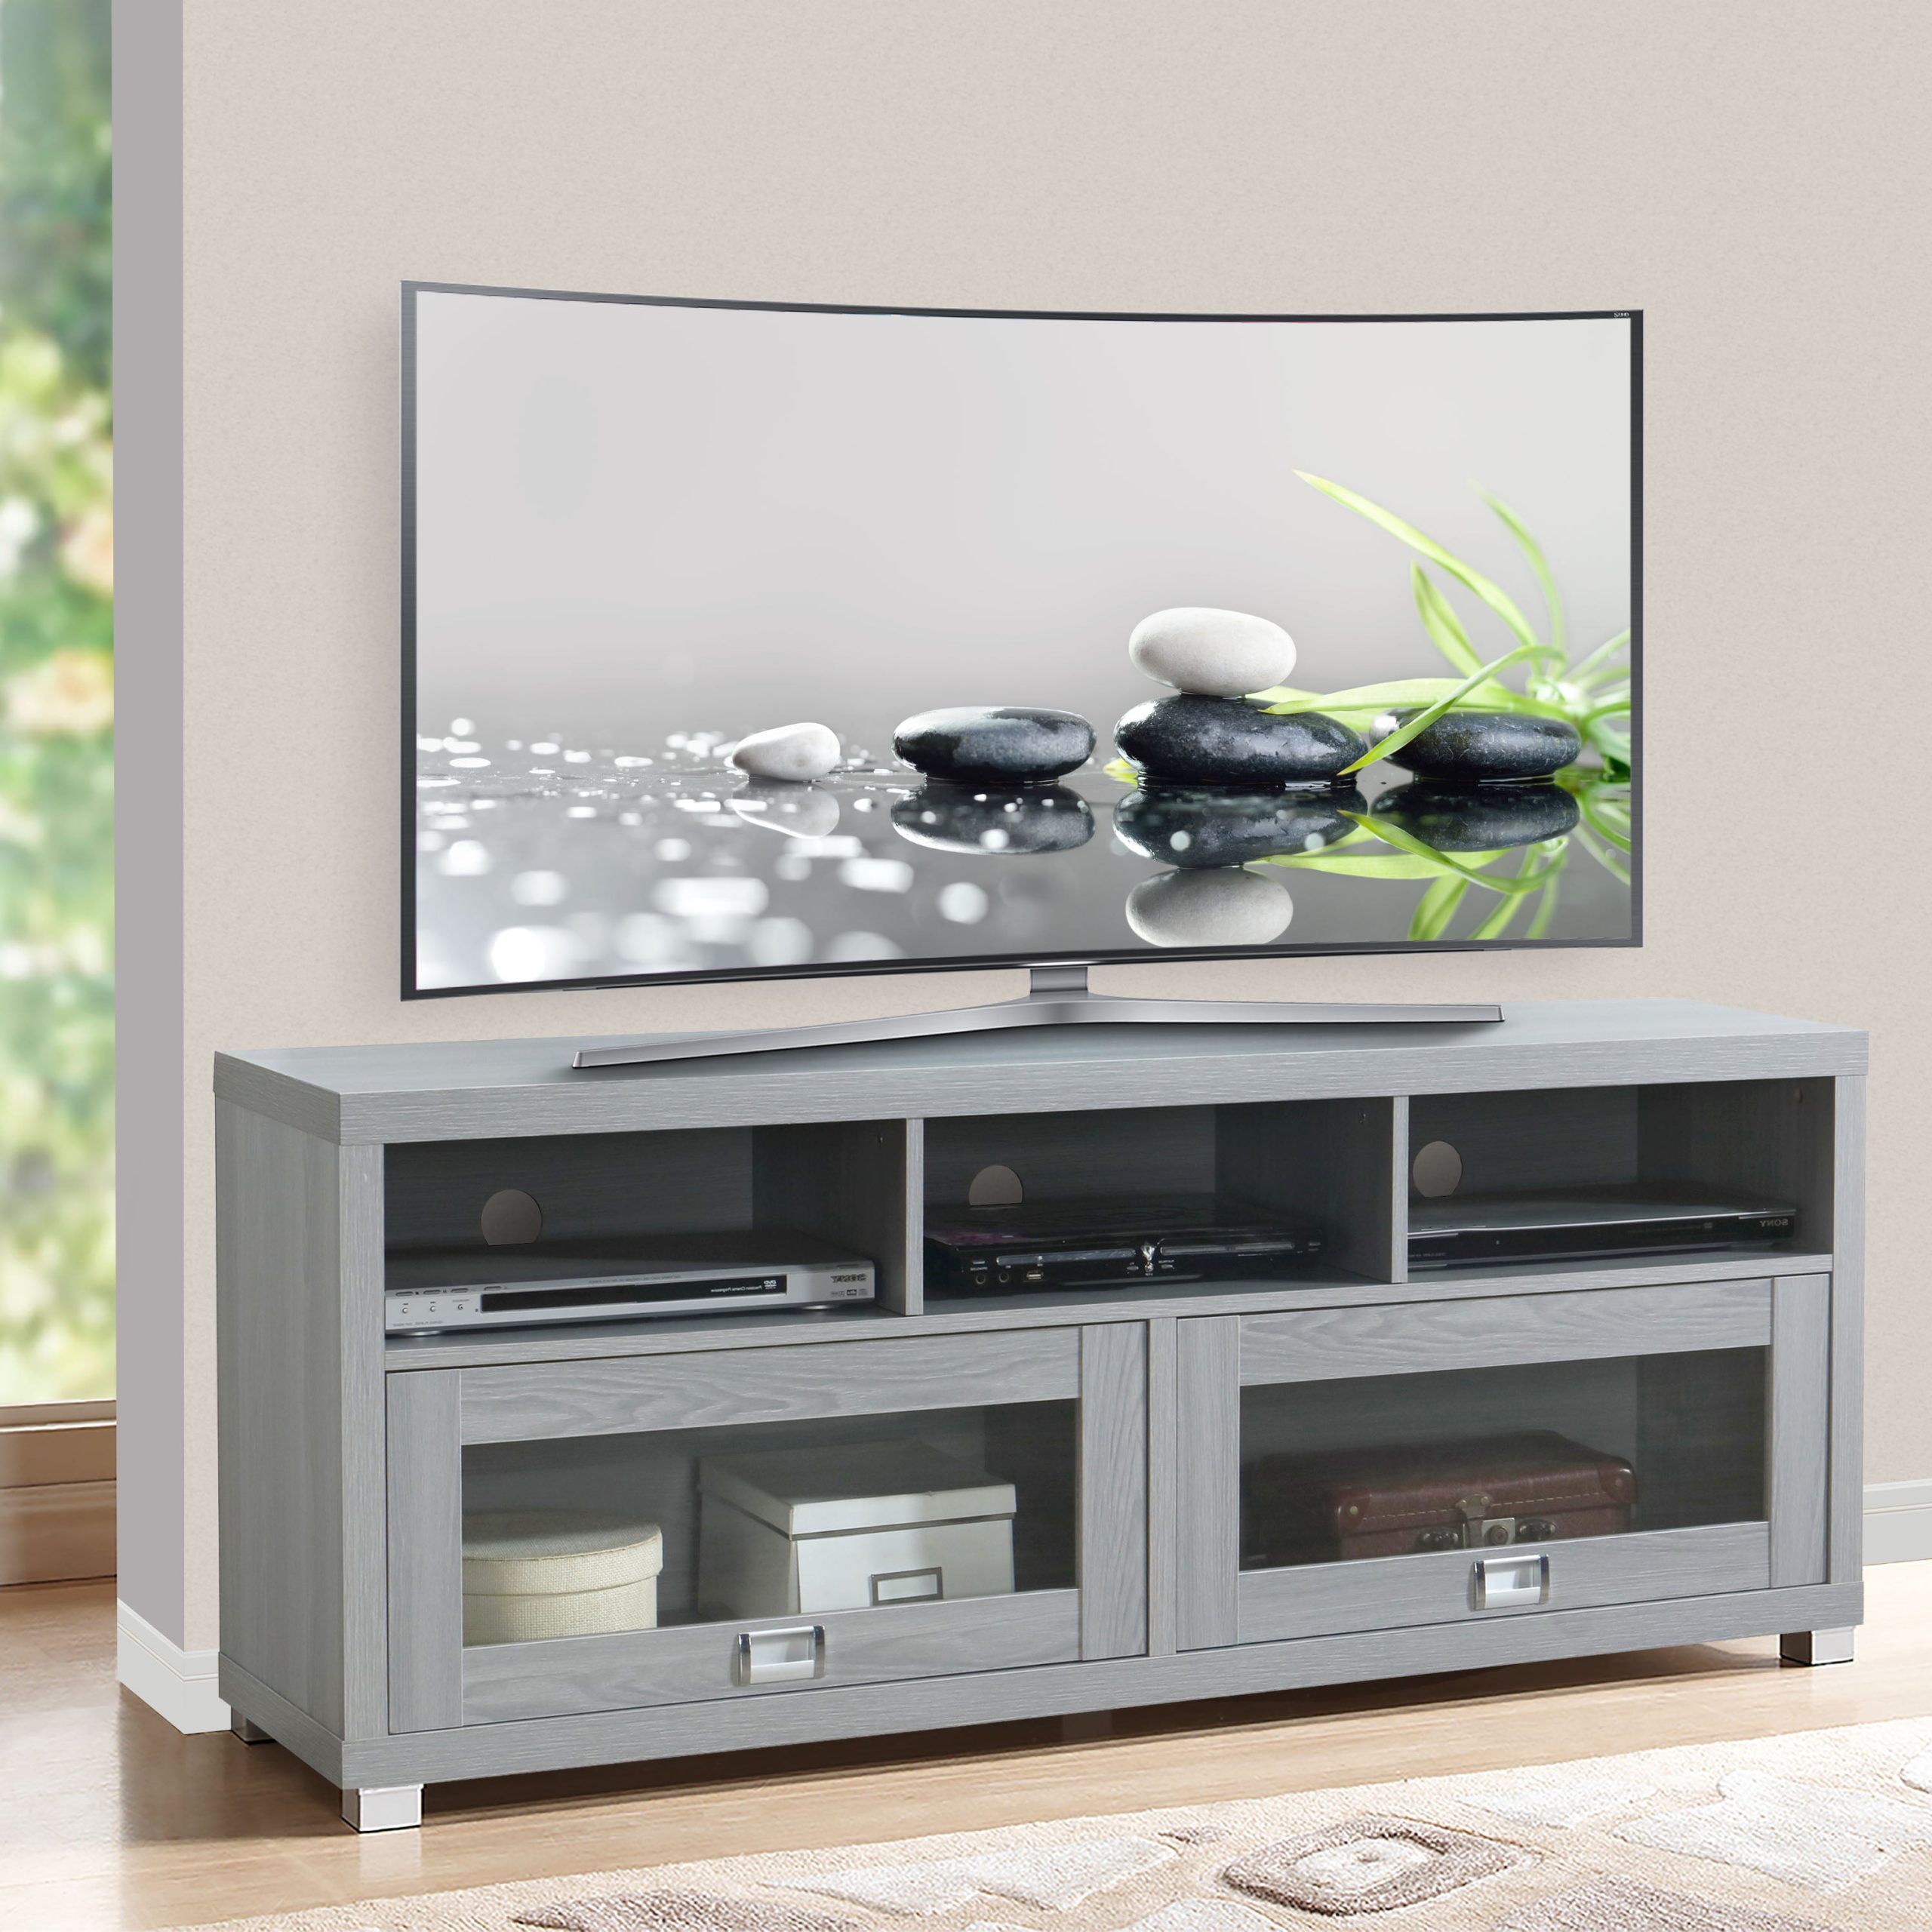 Tv Stand For 75 Inch Tv Tv 75 Inch Stand Glass Frosted Rta Tvm Shelves For Bestier Tv Stand For Tvs Up To 75" (View 19 of 20)